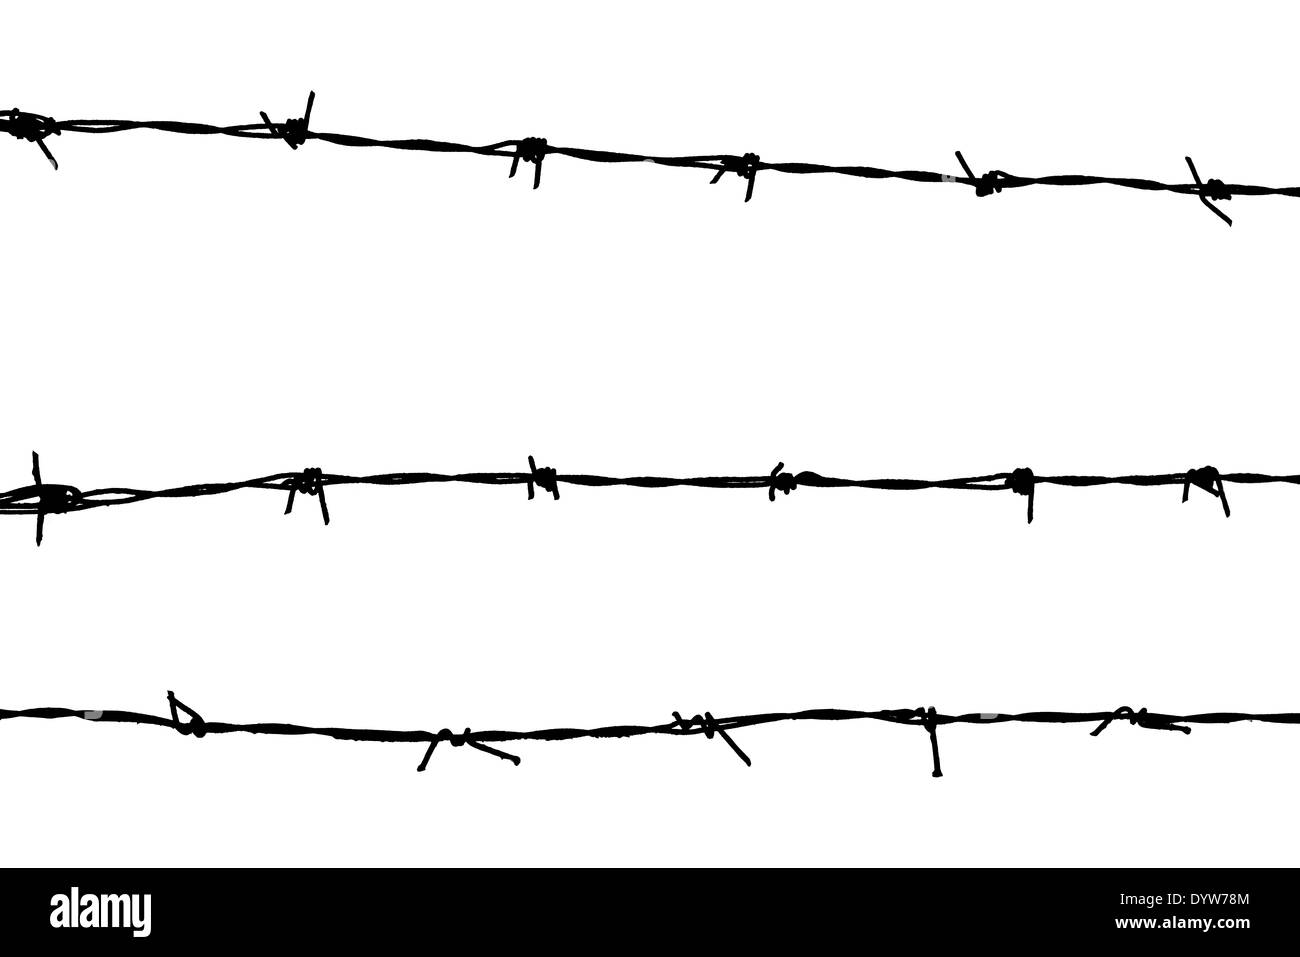 Silhouetted barbed wire on white background Stock Photo